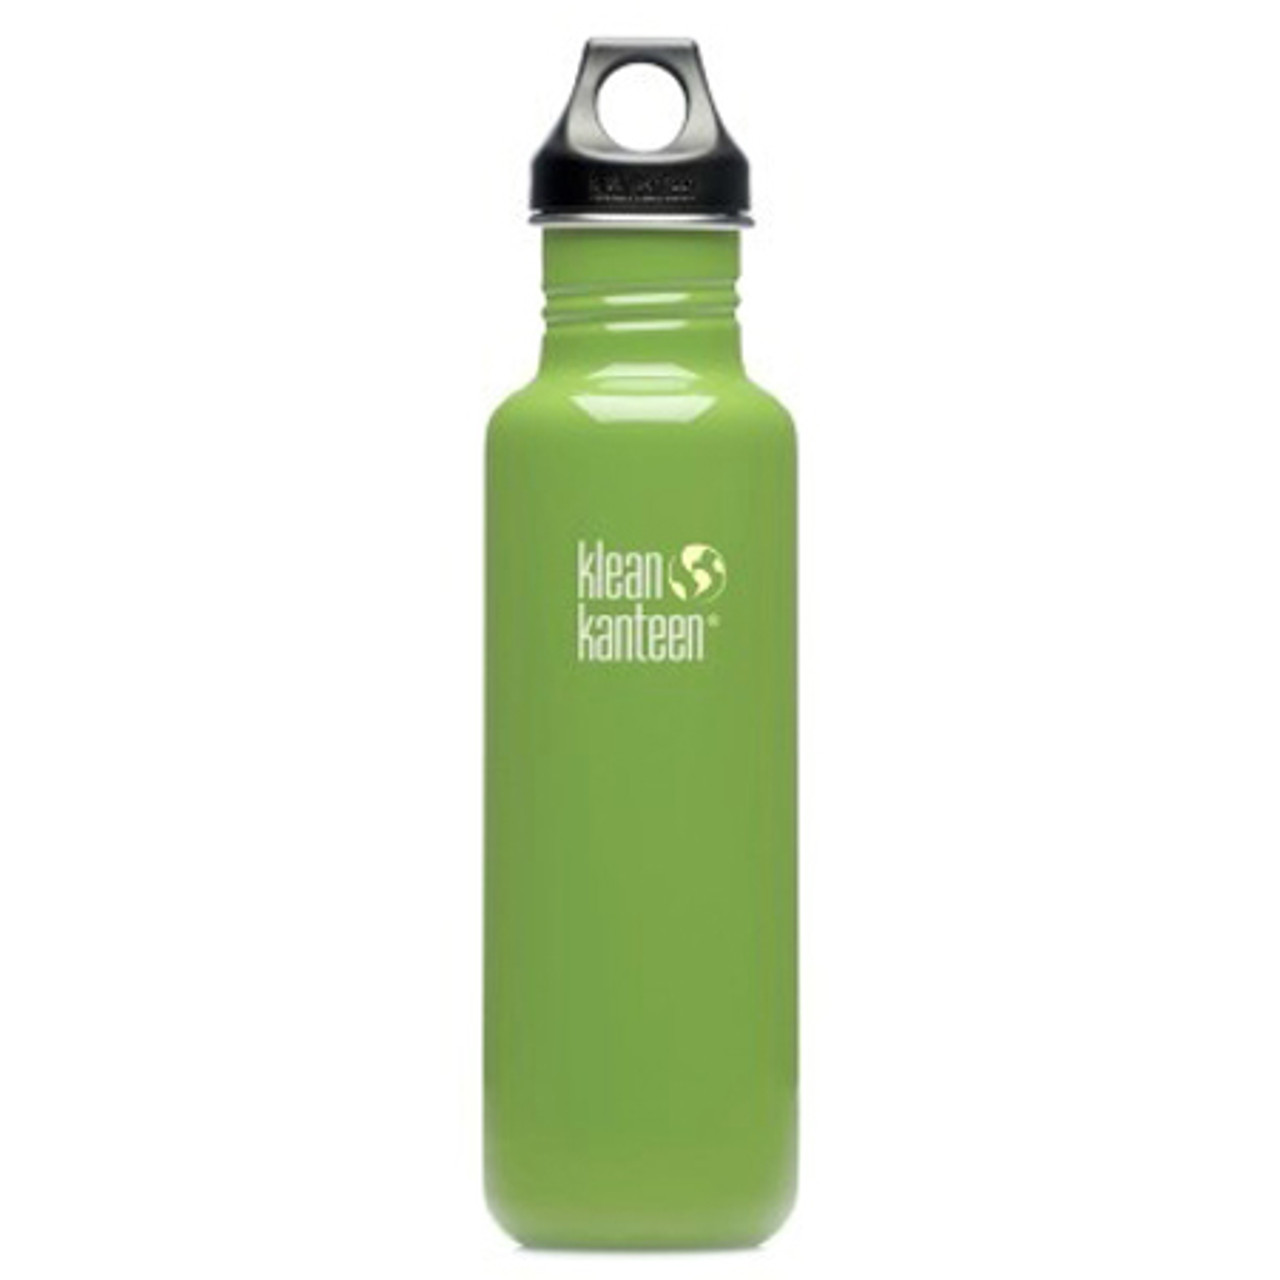 Klean Kanteen Classic Sport Bottle 27 Ounce, Brushed Stainless